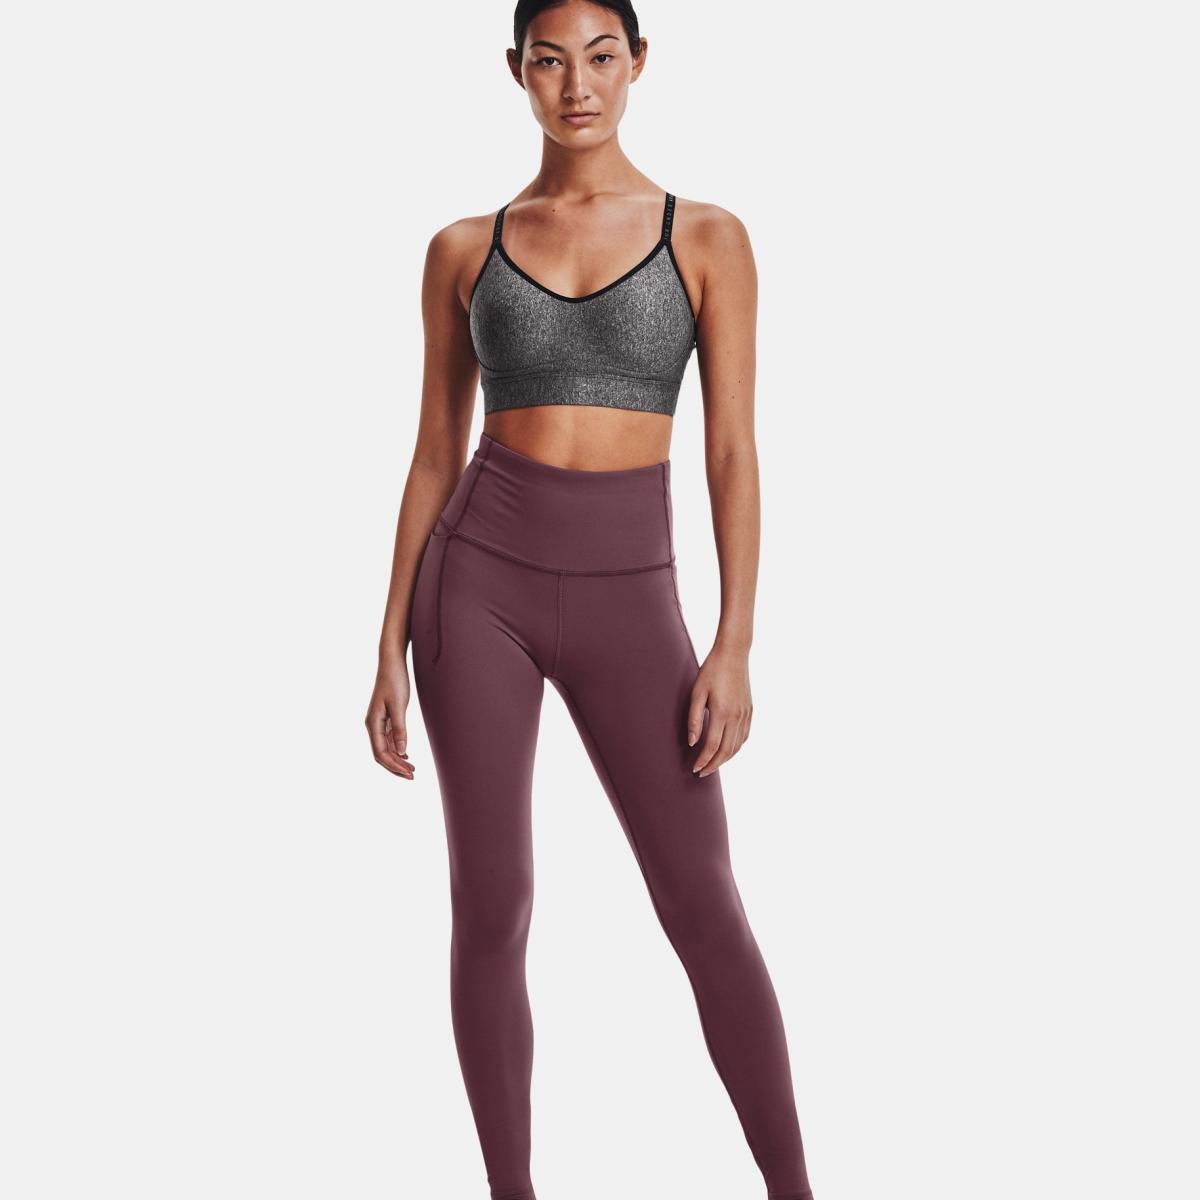 herir Herencia igual The Under Armour Leggings Perfect For Workouts and Day-to-Day Living